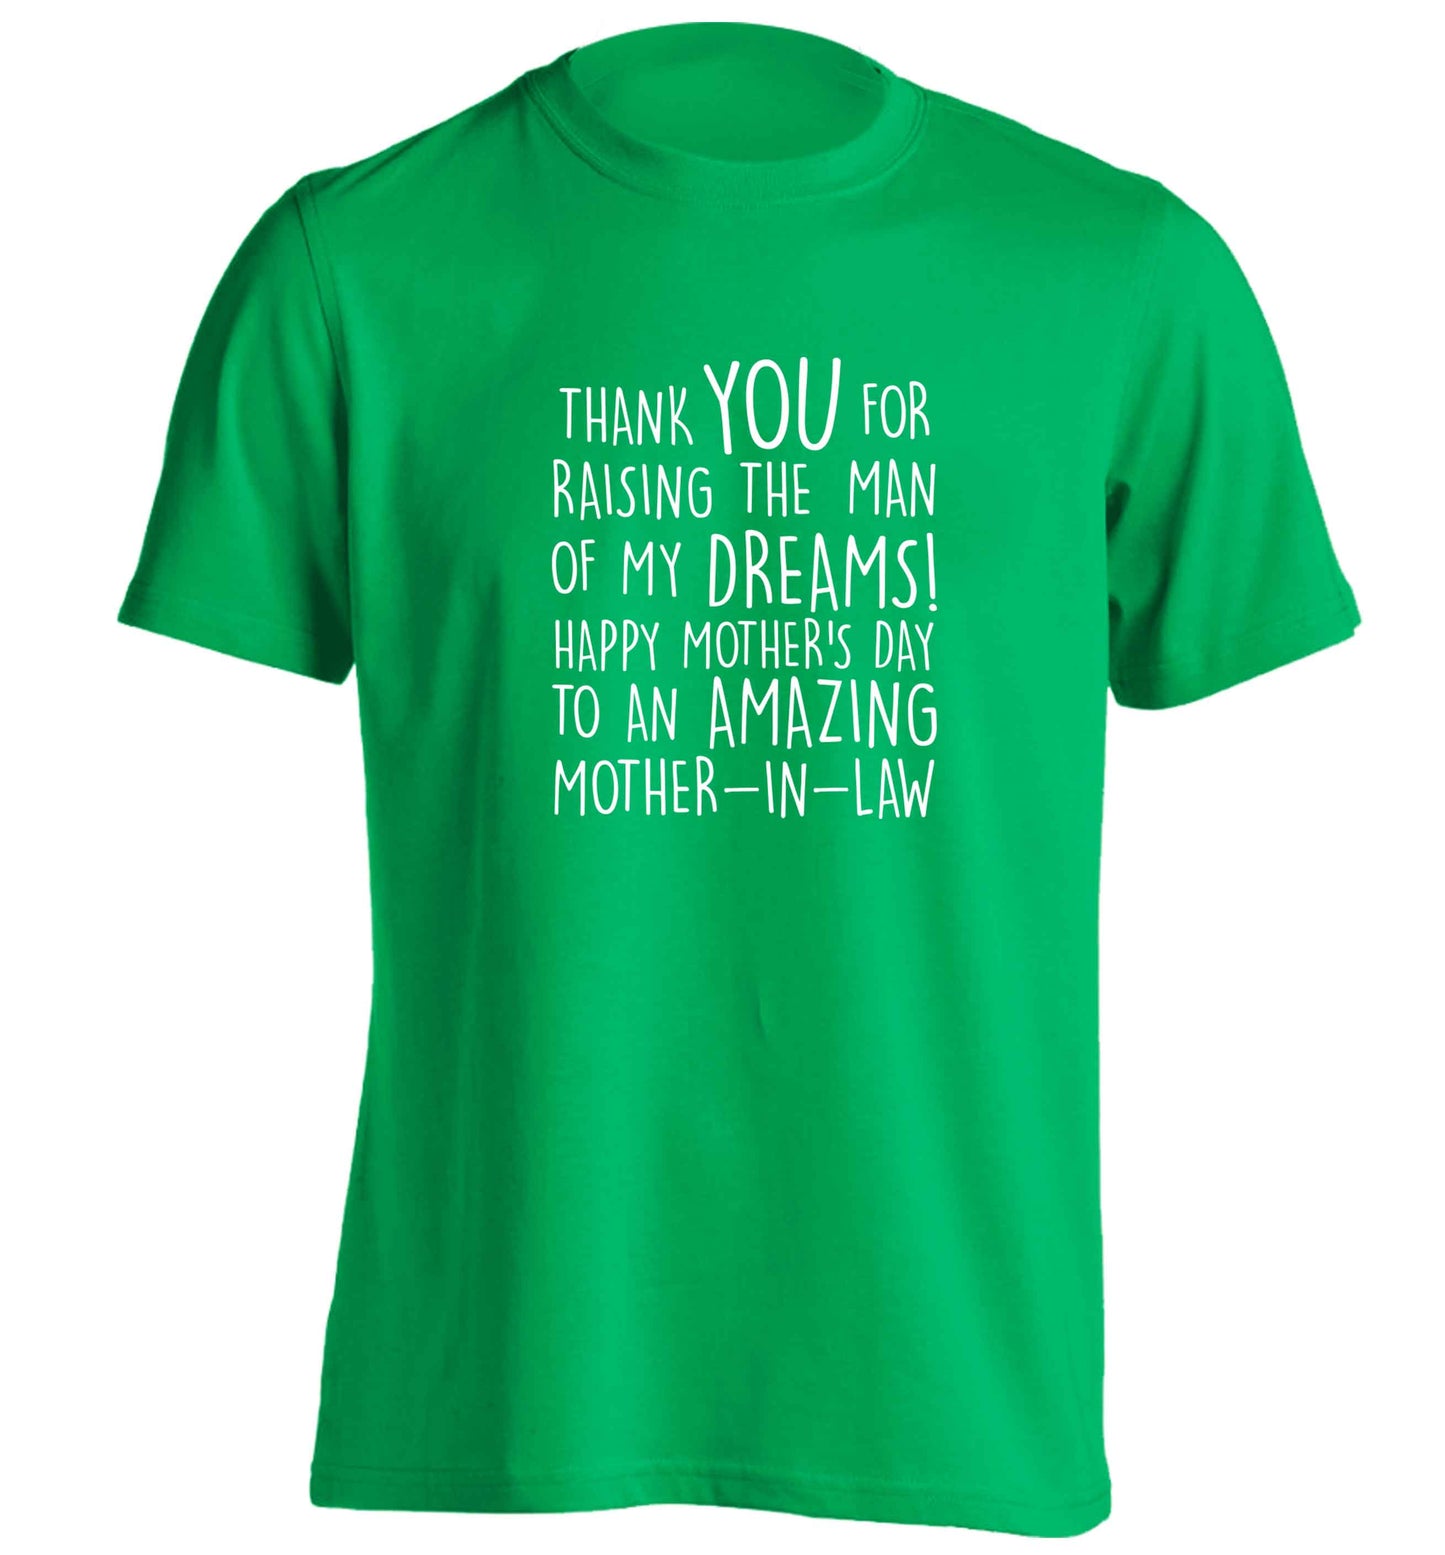 Raising the man of my dreams mother's day mother-in-law adults unisex green Tshirt 2XL